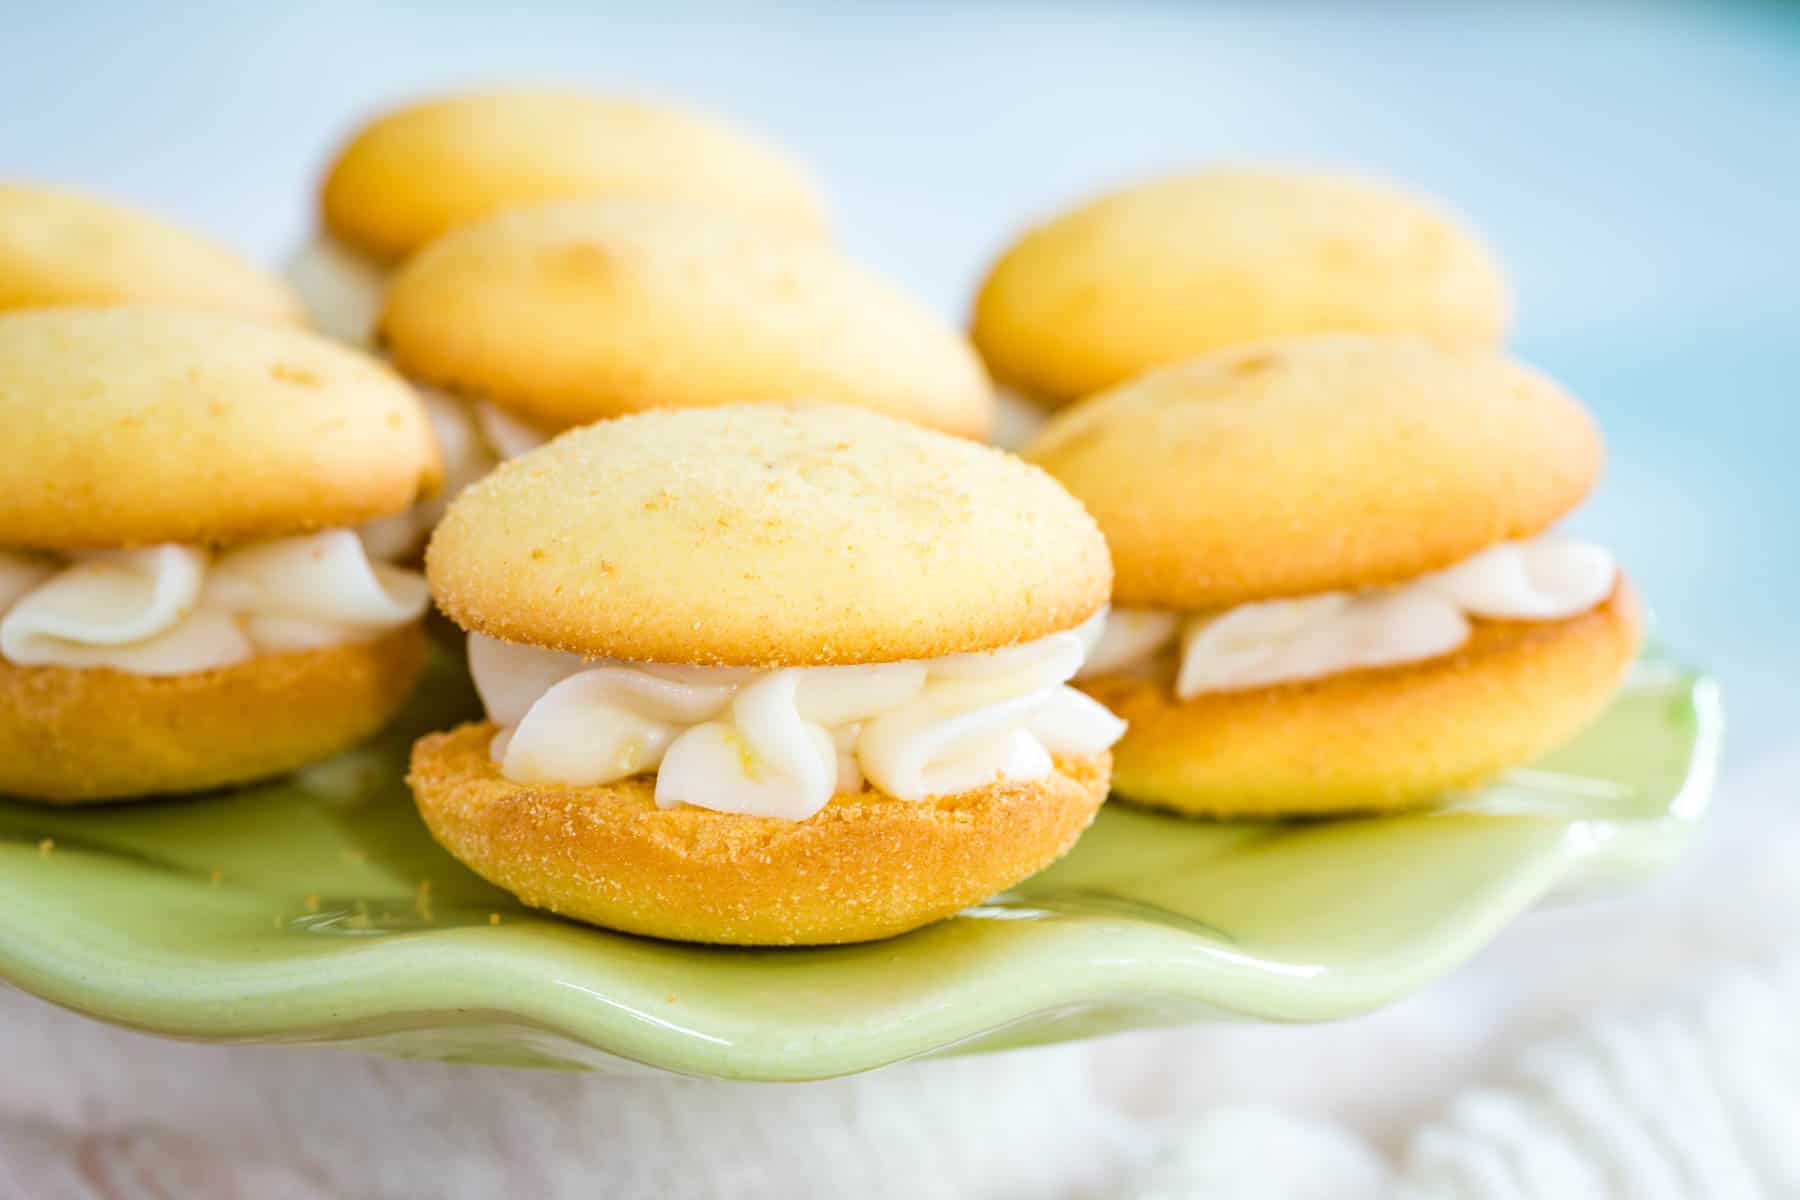 Several small sandwich cookies on a pale green platter with a scalloped edge.